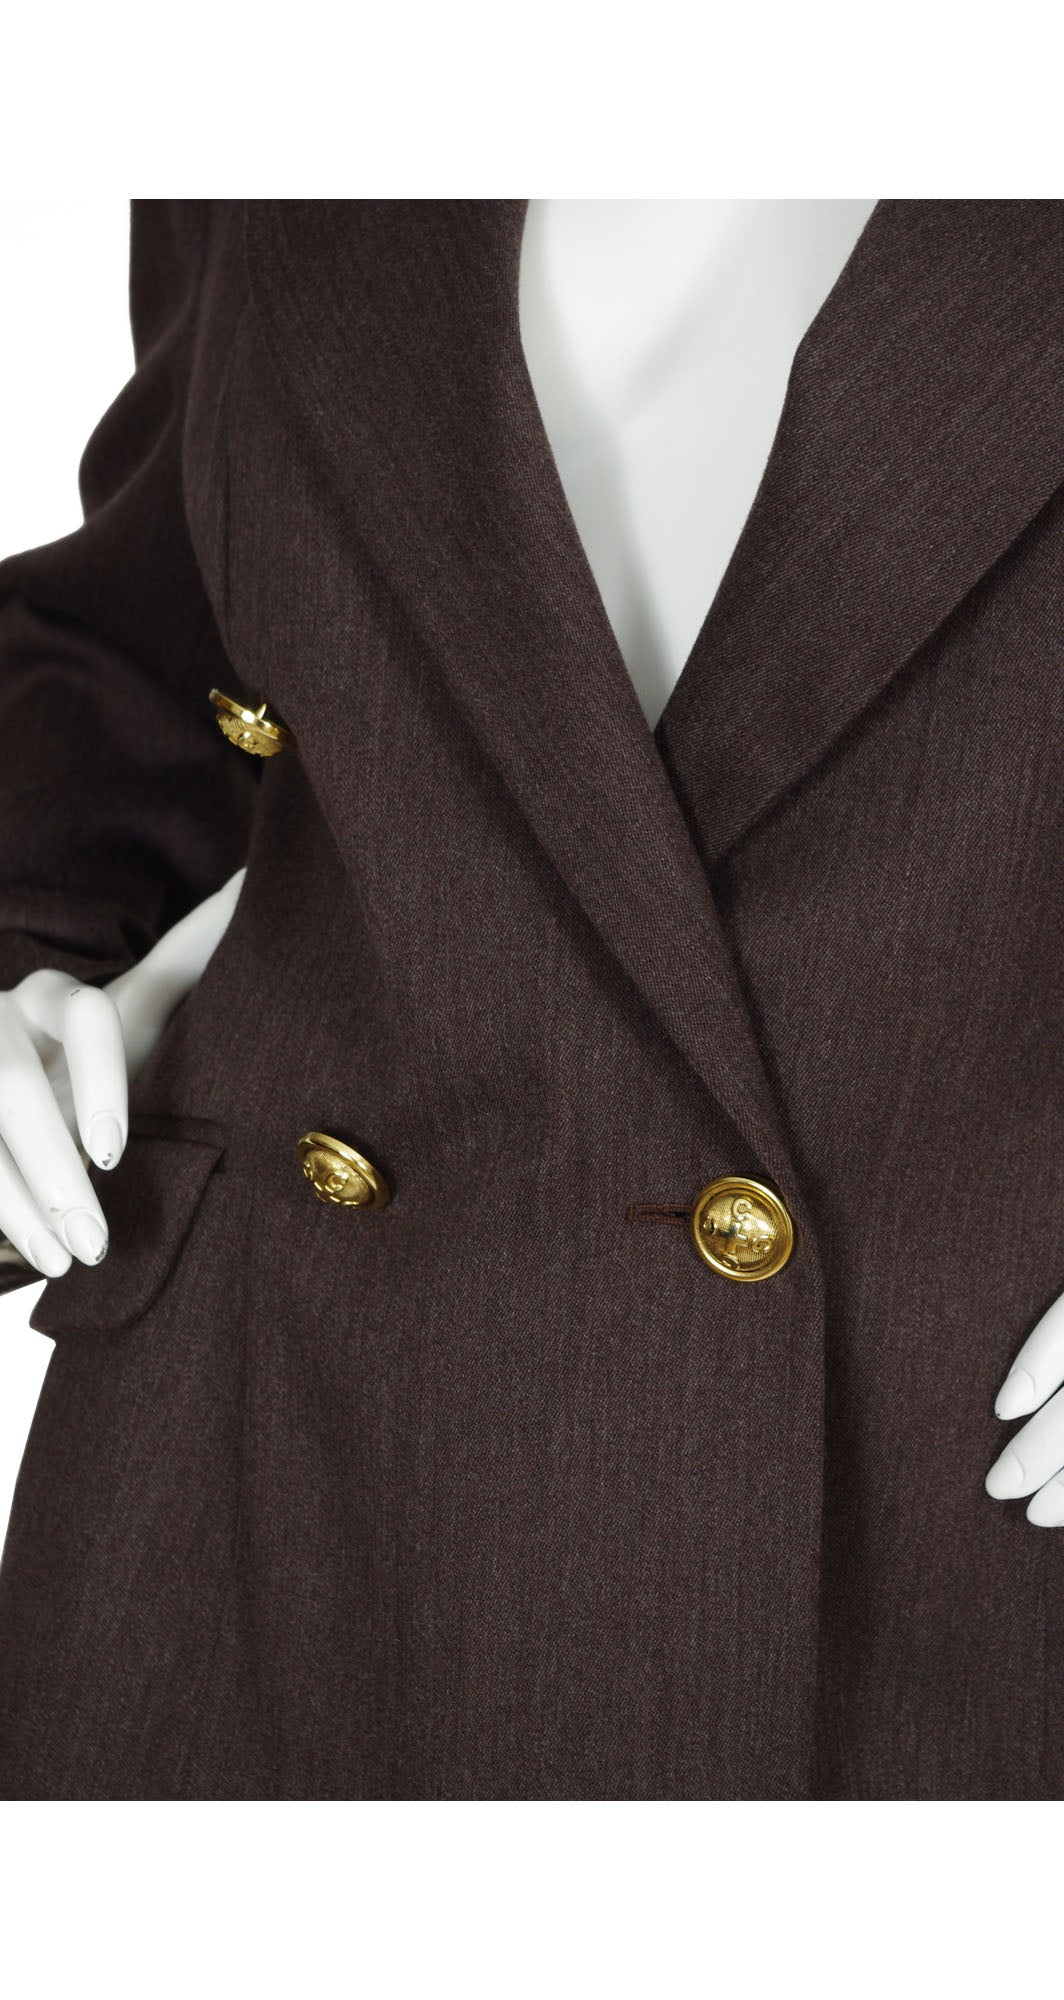 1990s Cheap and Chic Brown Wool Skirt Suit